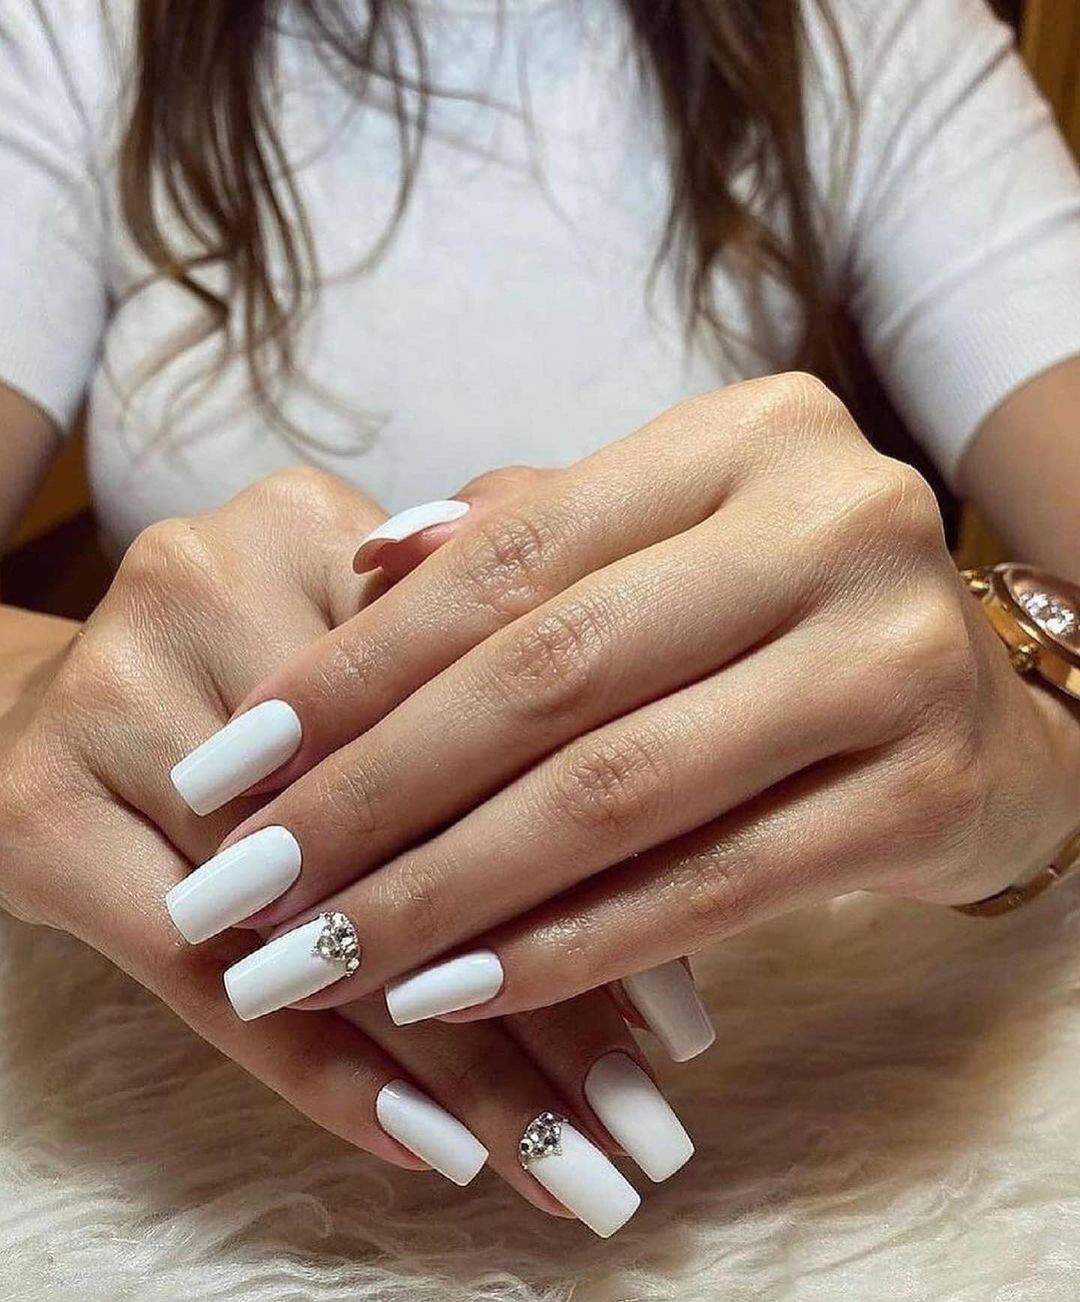 35 Cute Summer Nails To Rock For Women In 2021 images 19